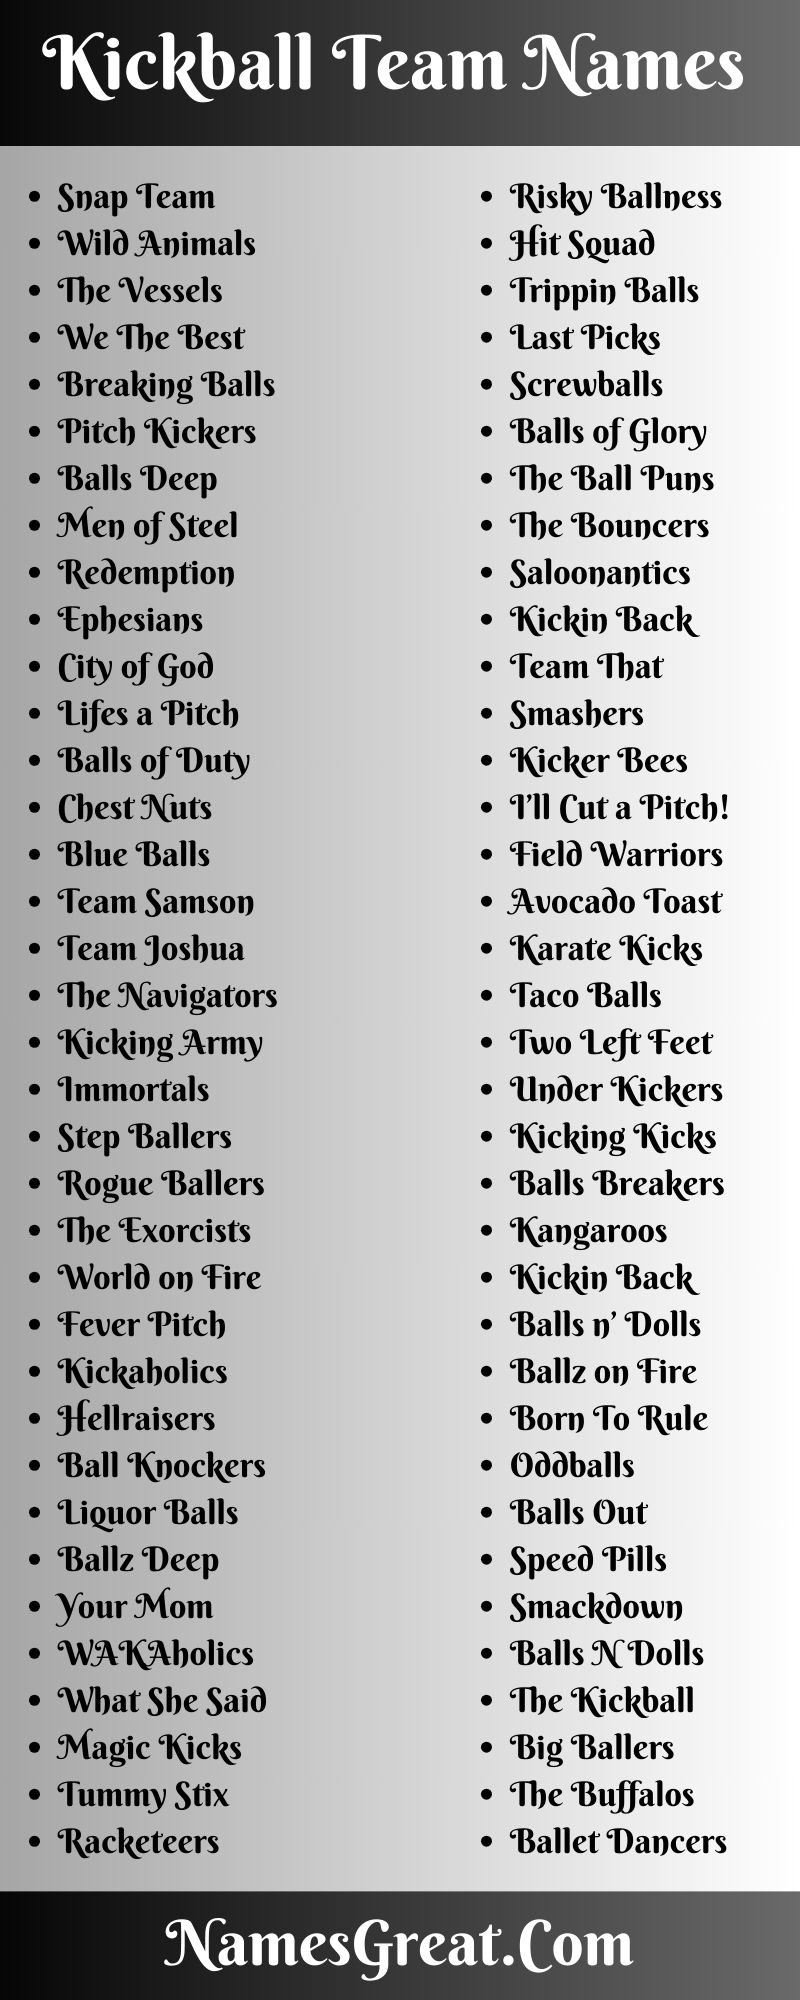 289+ Kickball Team Names That Could Inspire Your Team